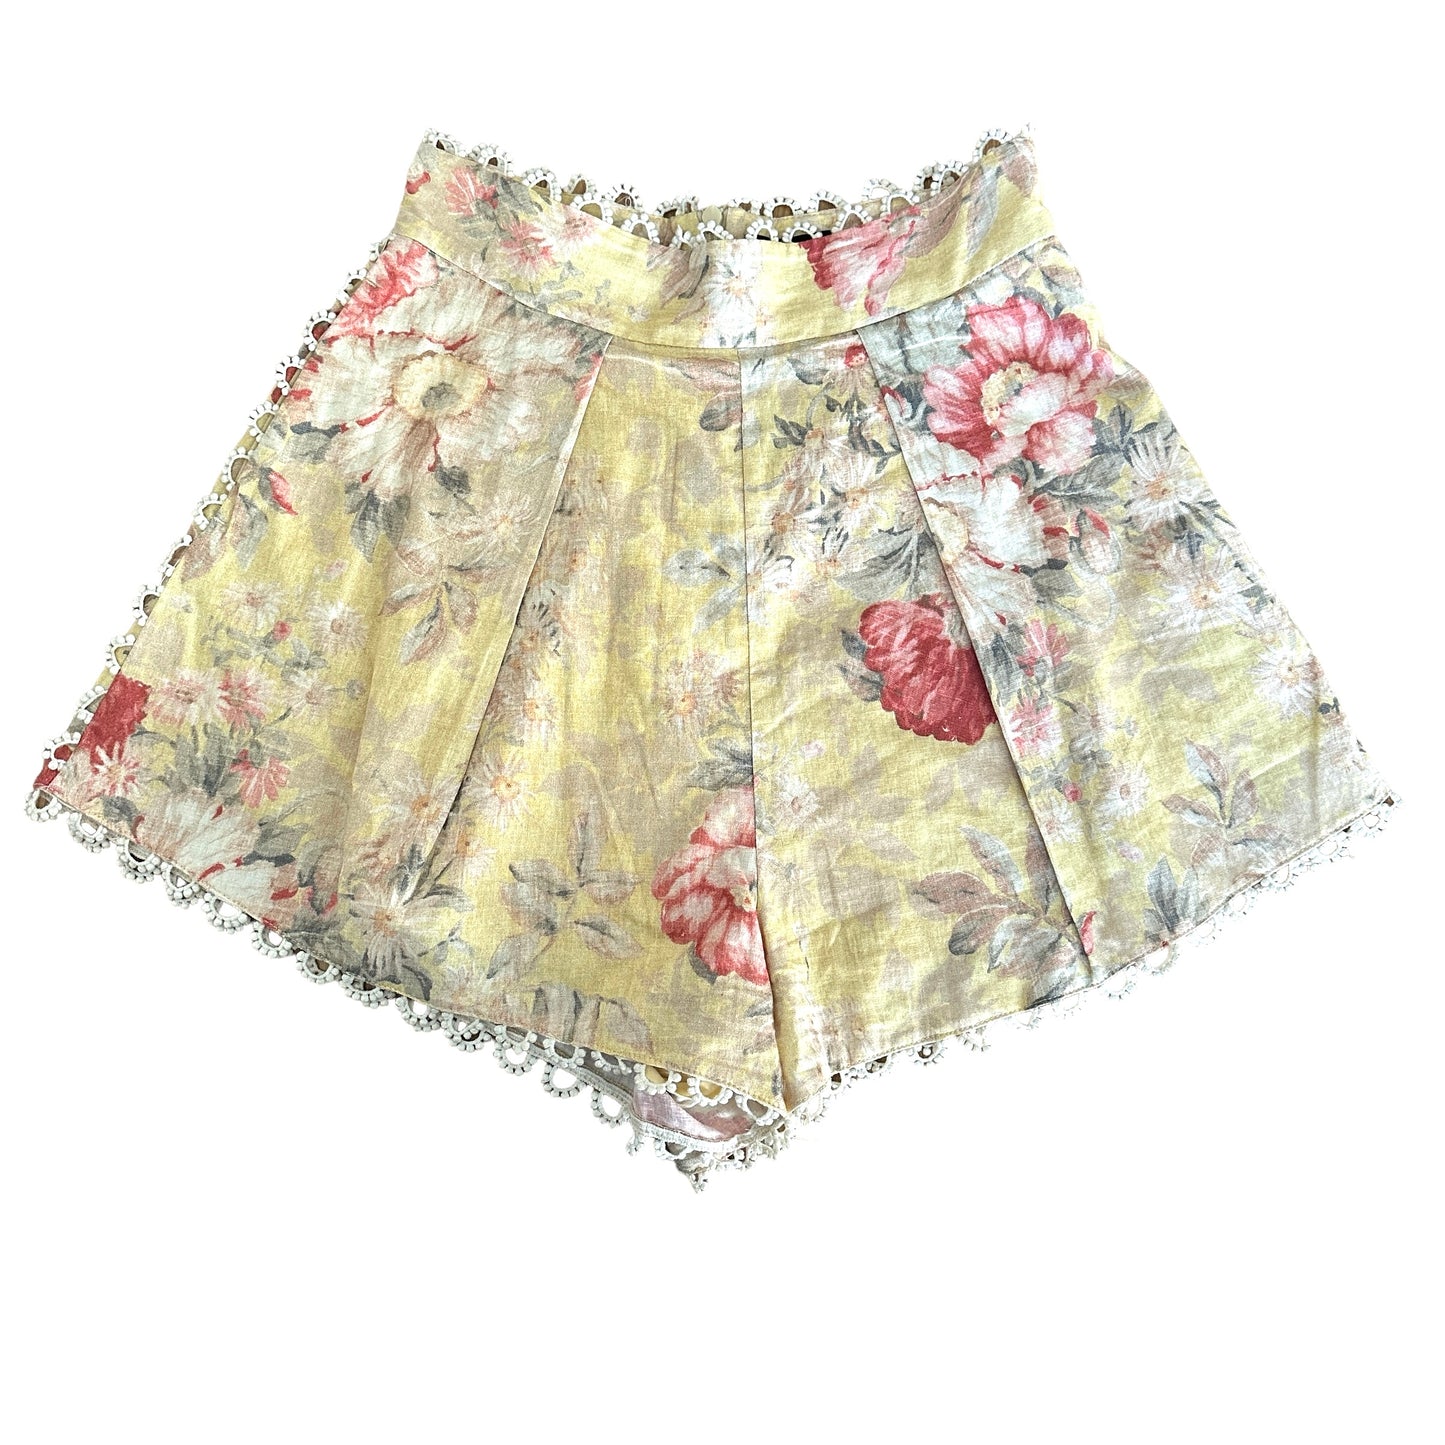 High-Waisted Floral Shorts - S/M